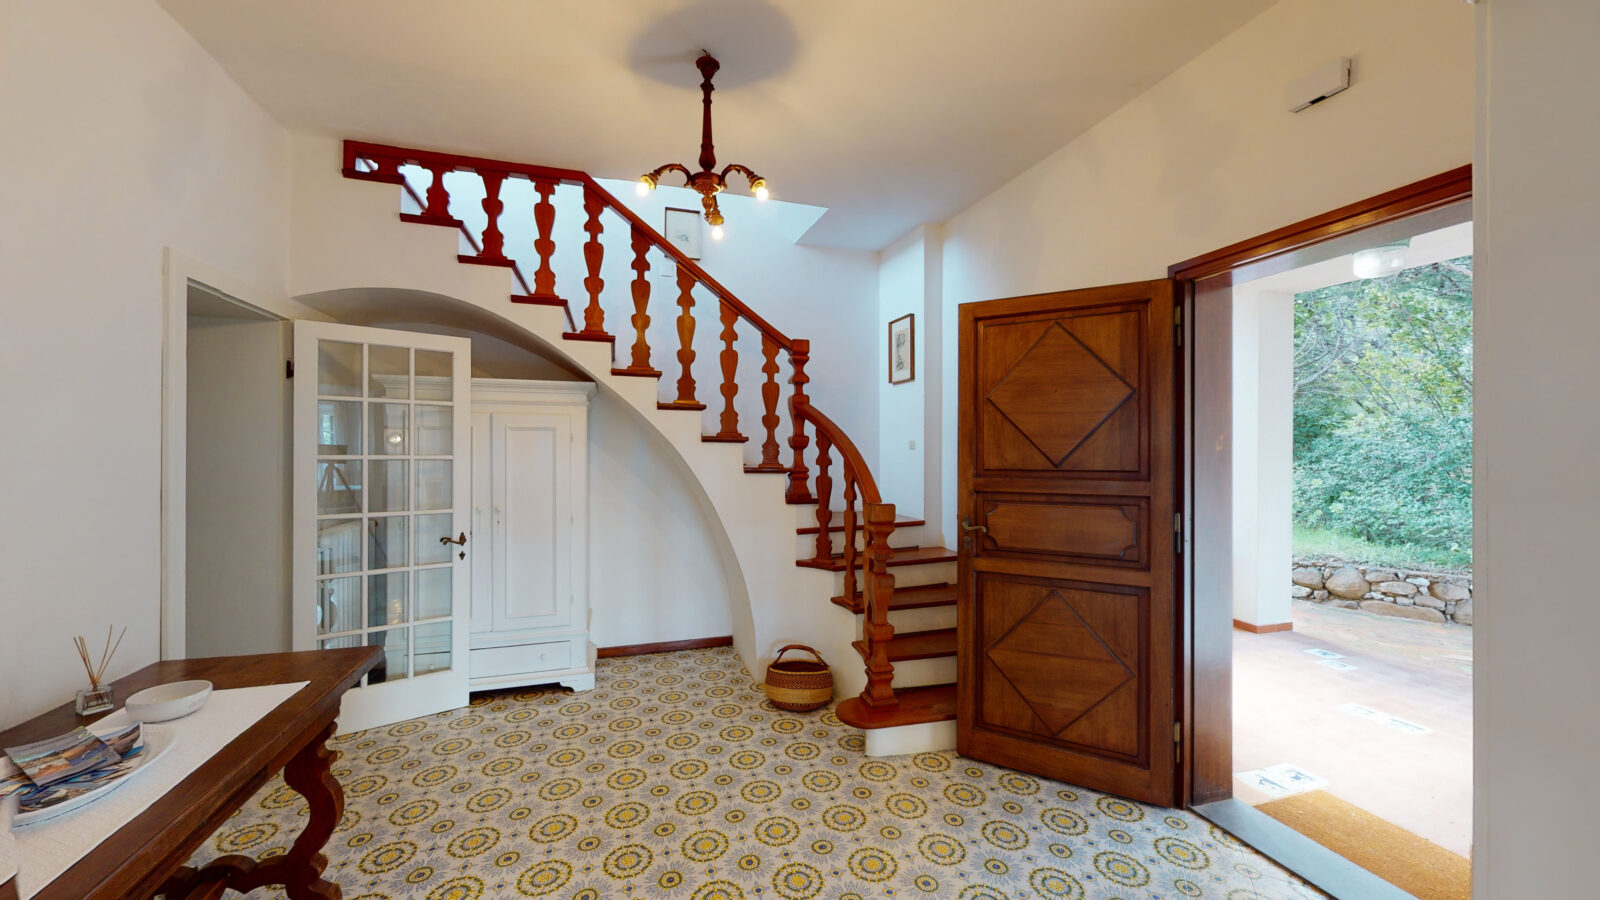 interior view of the home with white walls and a large staircase